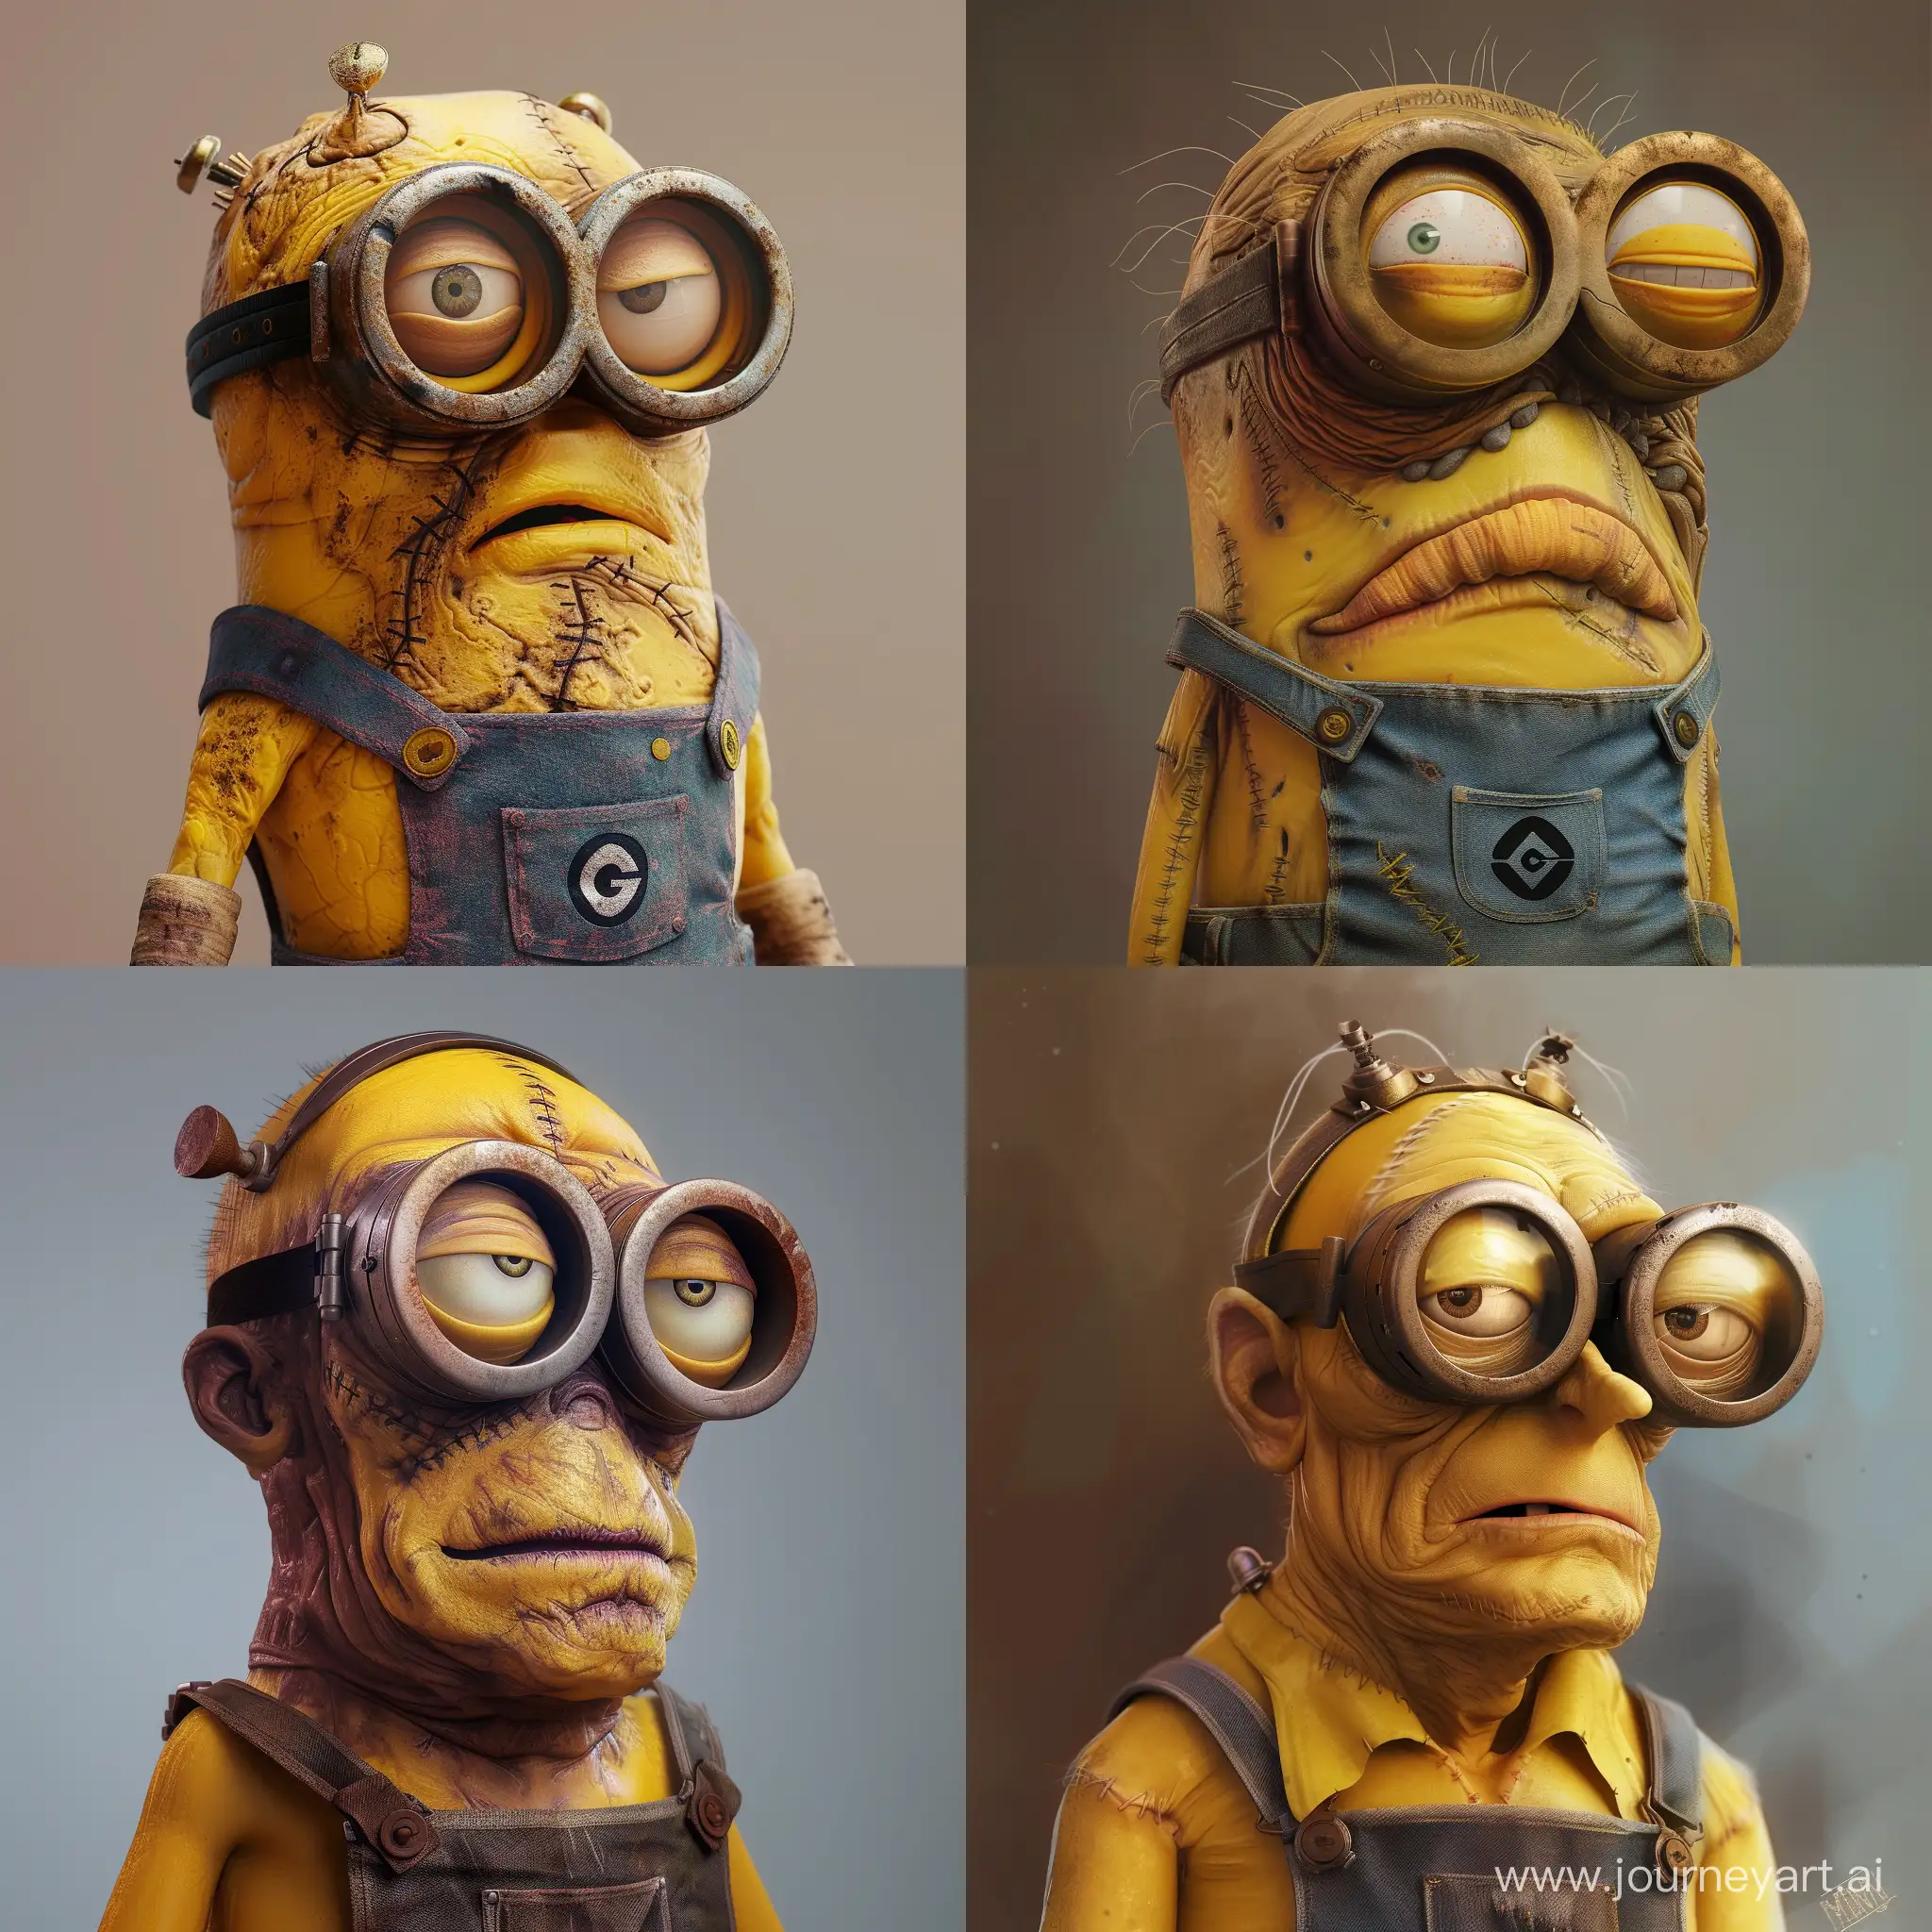 FrankensteinMinion-Hybrid-Iconic-Fusion-of-Minion-and-Monster